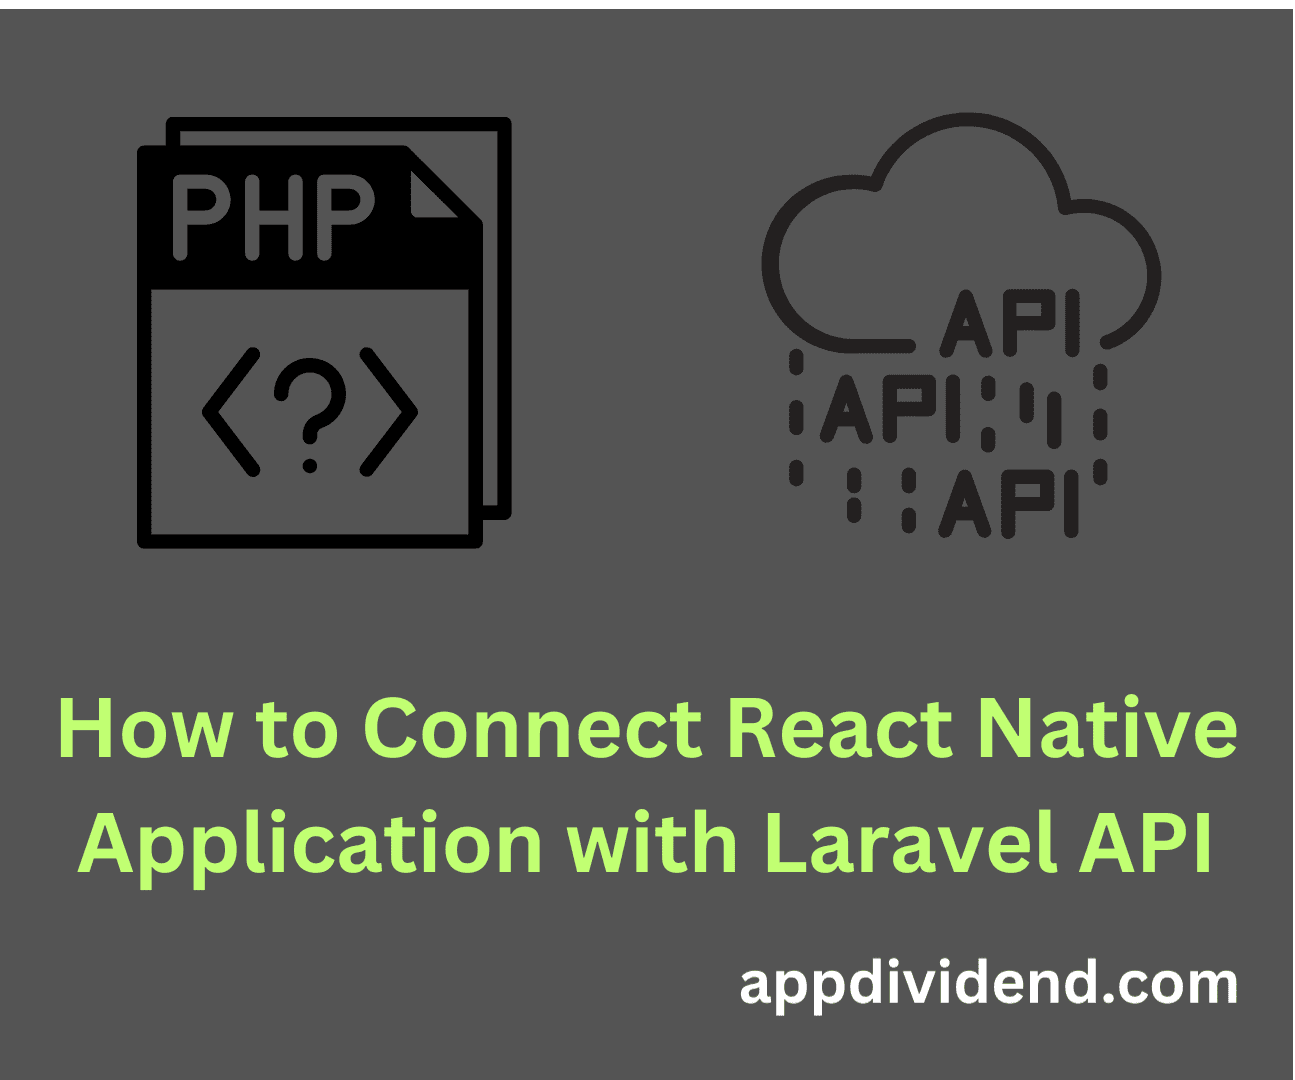 How to Connect React Native Application with Laravel API